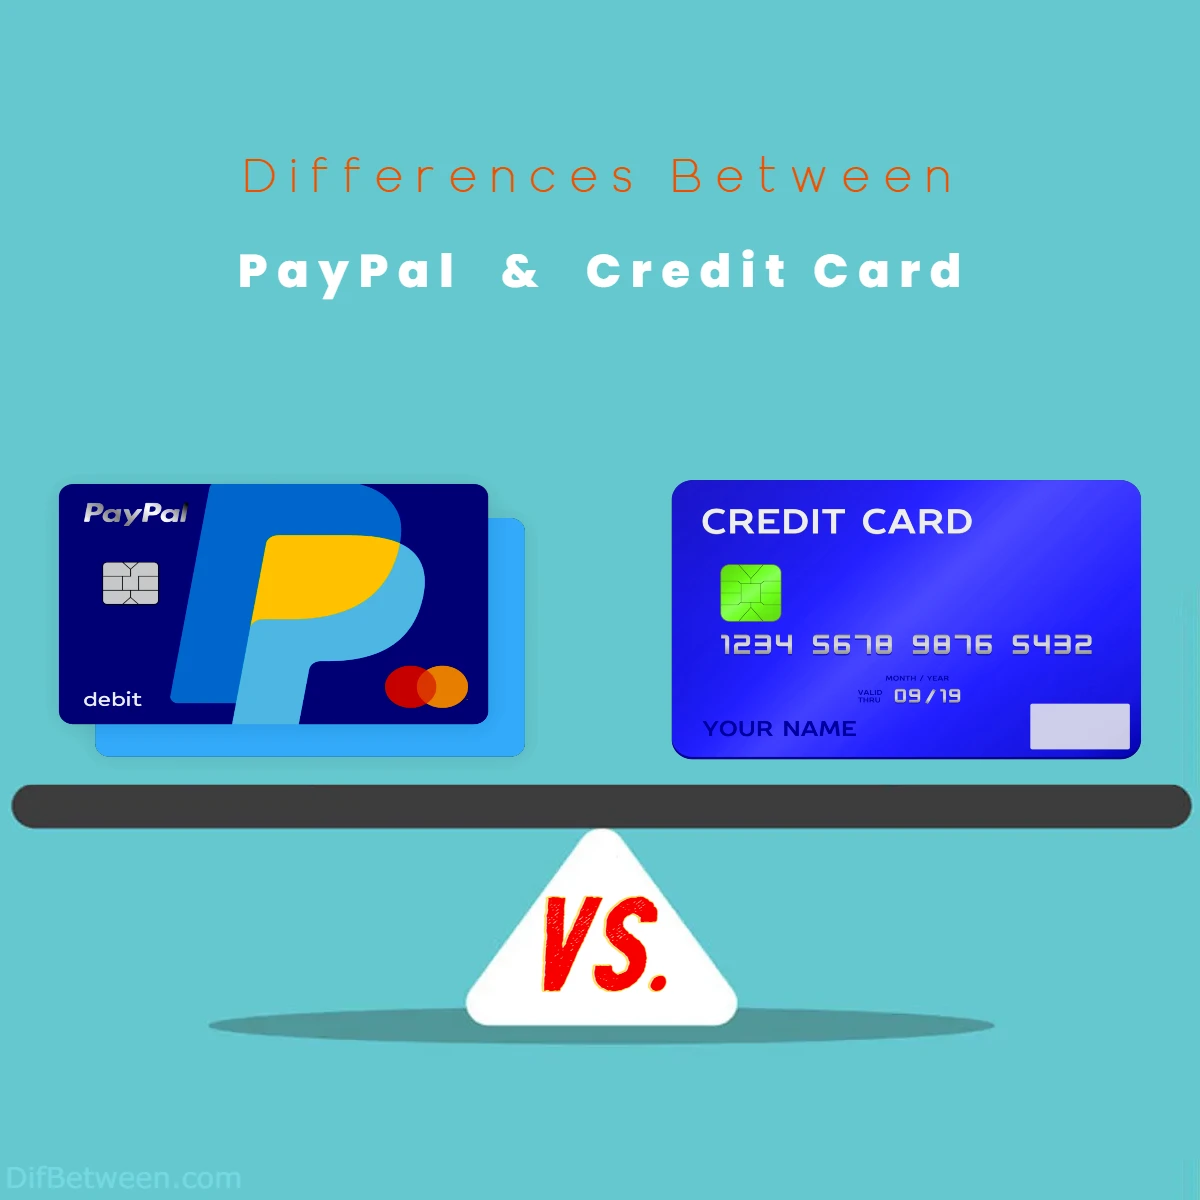 Differences Between PayPal vs Credit Card